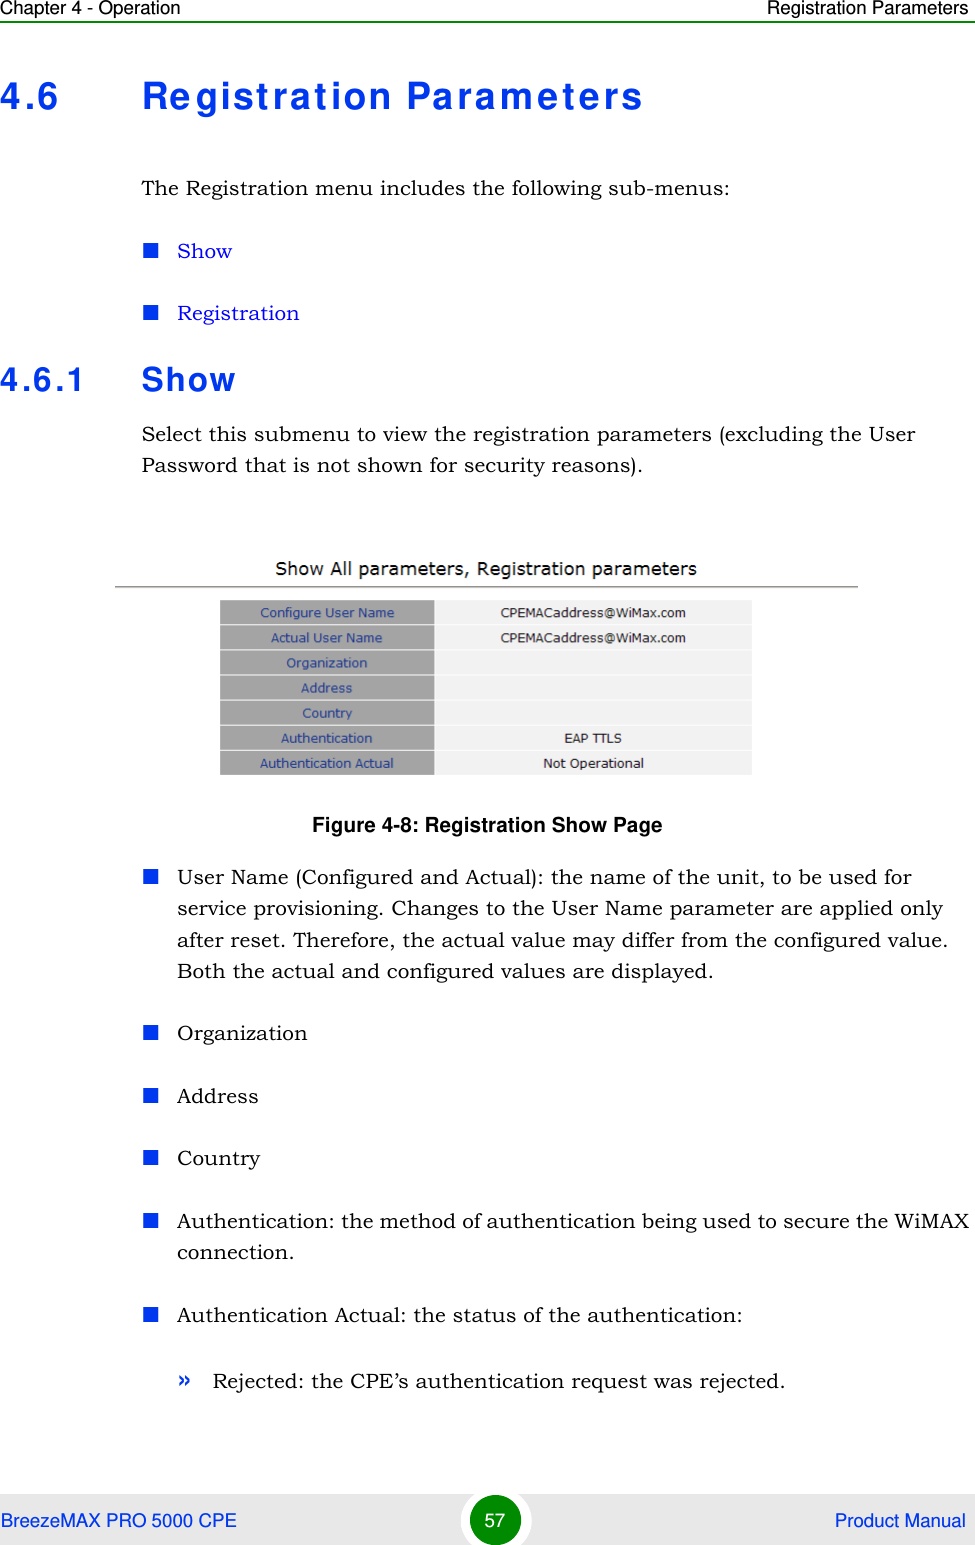 Chapter 4 - Operation Registration ParametersBreezeMAX PRO 5000 CPE 57  Product Manual4.6 Registration ParametersThe Registration menu includes the following sub-menus:ShowRegistration4.6.1 ShowSelect this submenu to view the registration parameters (excluding the User Password that is not shown for security reasons).User Name (Configured and Actual): the name of the unit, to be used for service provisioning. Changes to the User Name parameter are applied only after reset. Therefore, the actual value may differ from the configured value. Both the actual and configured values are displayed.OrganizationAddressCountryAuthentication: the method of authentication being used to secure the WiMAX connection.Authentication Actual: the status of the authentication:»Rejected: the CPE’s authentication request was rejected.Figure 4-8: Registration Show Page